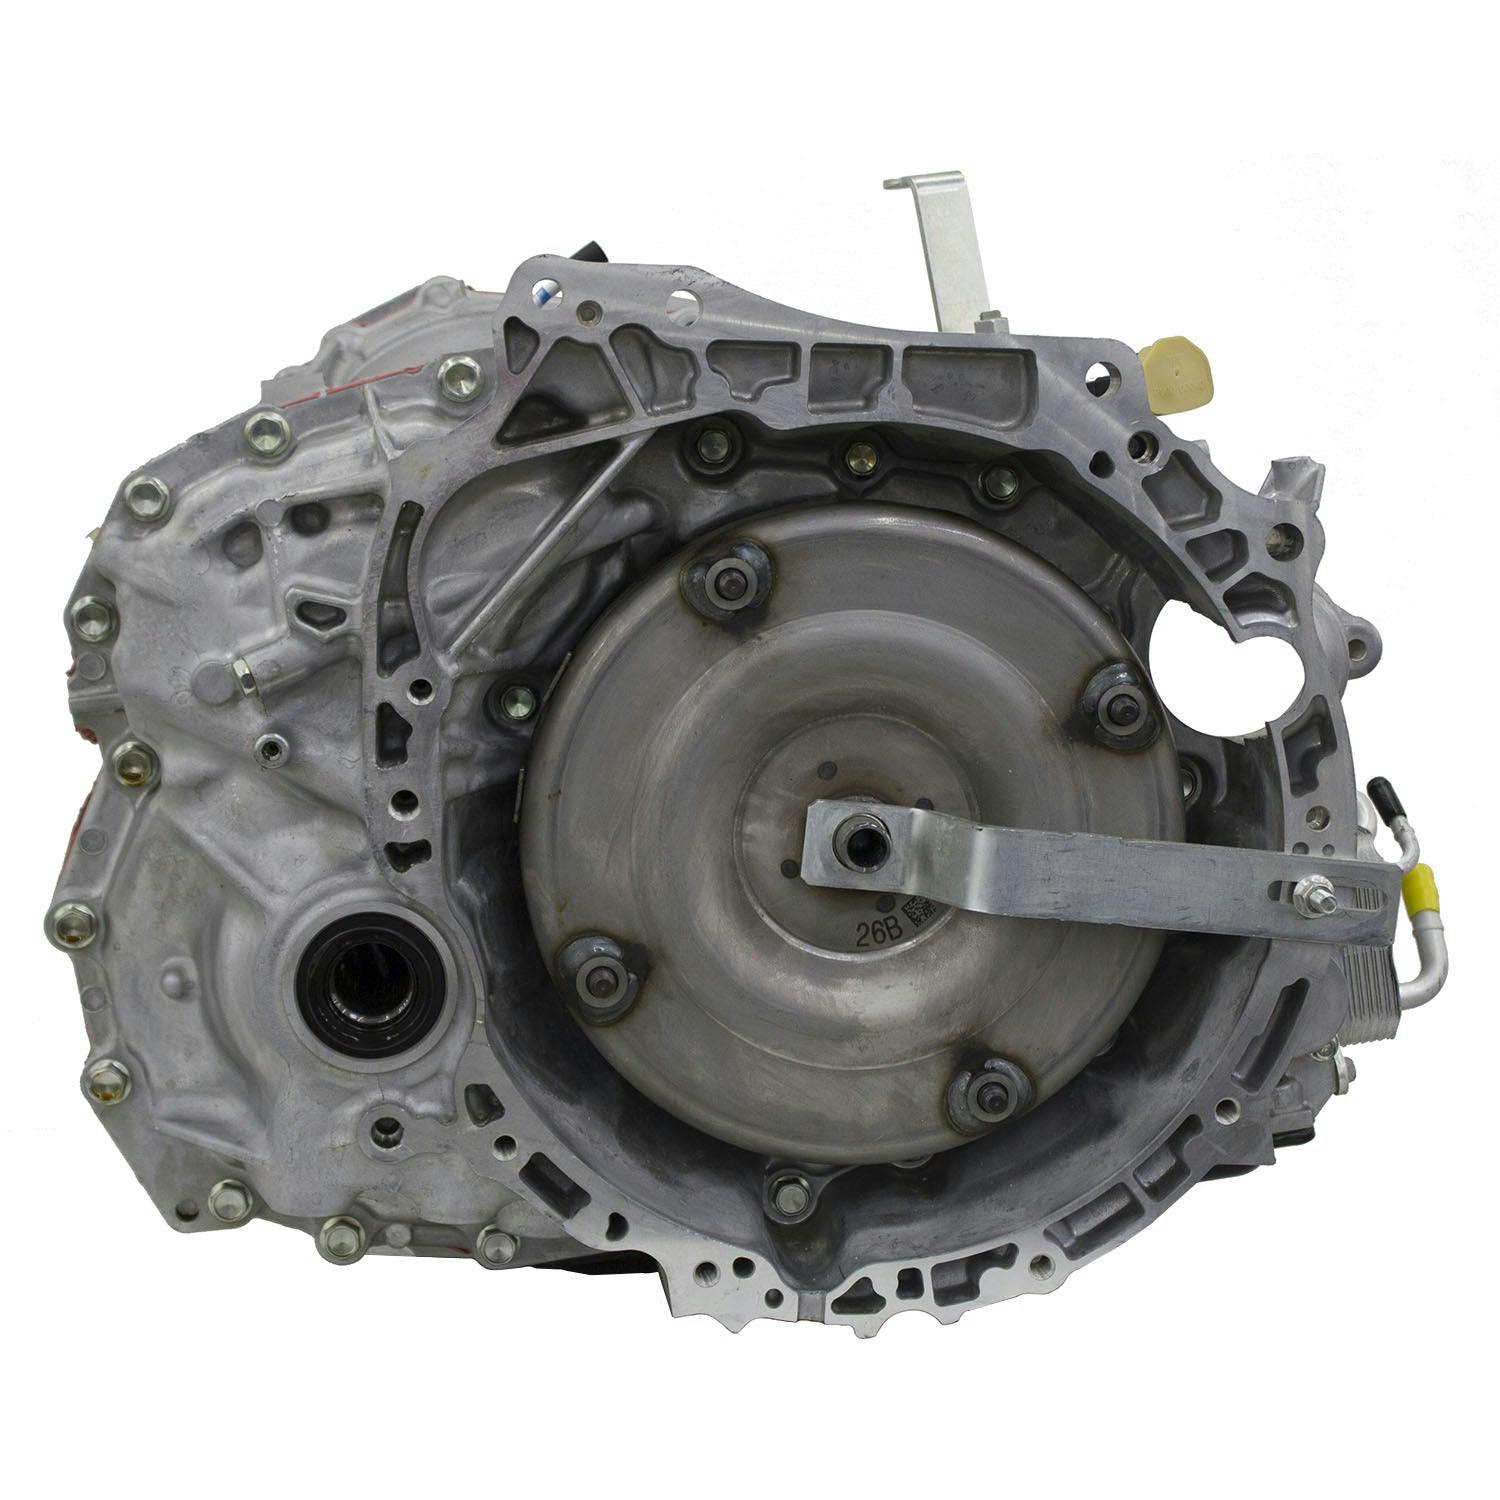 Automatic Transmission for 2009 Nissan Altima FWD with 2.5L Inline-4 Engine